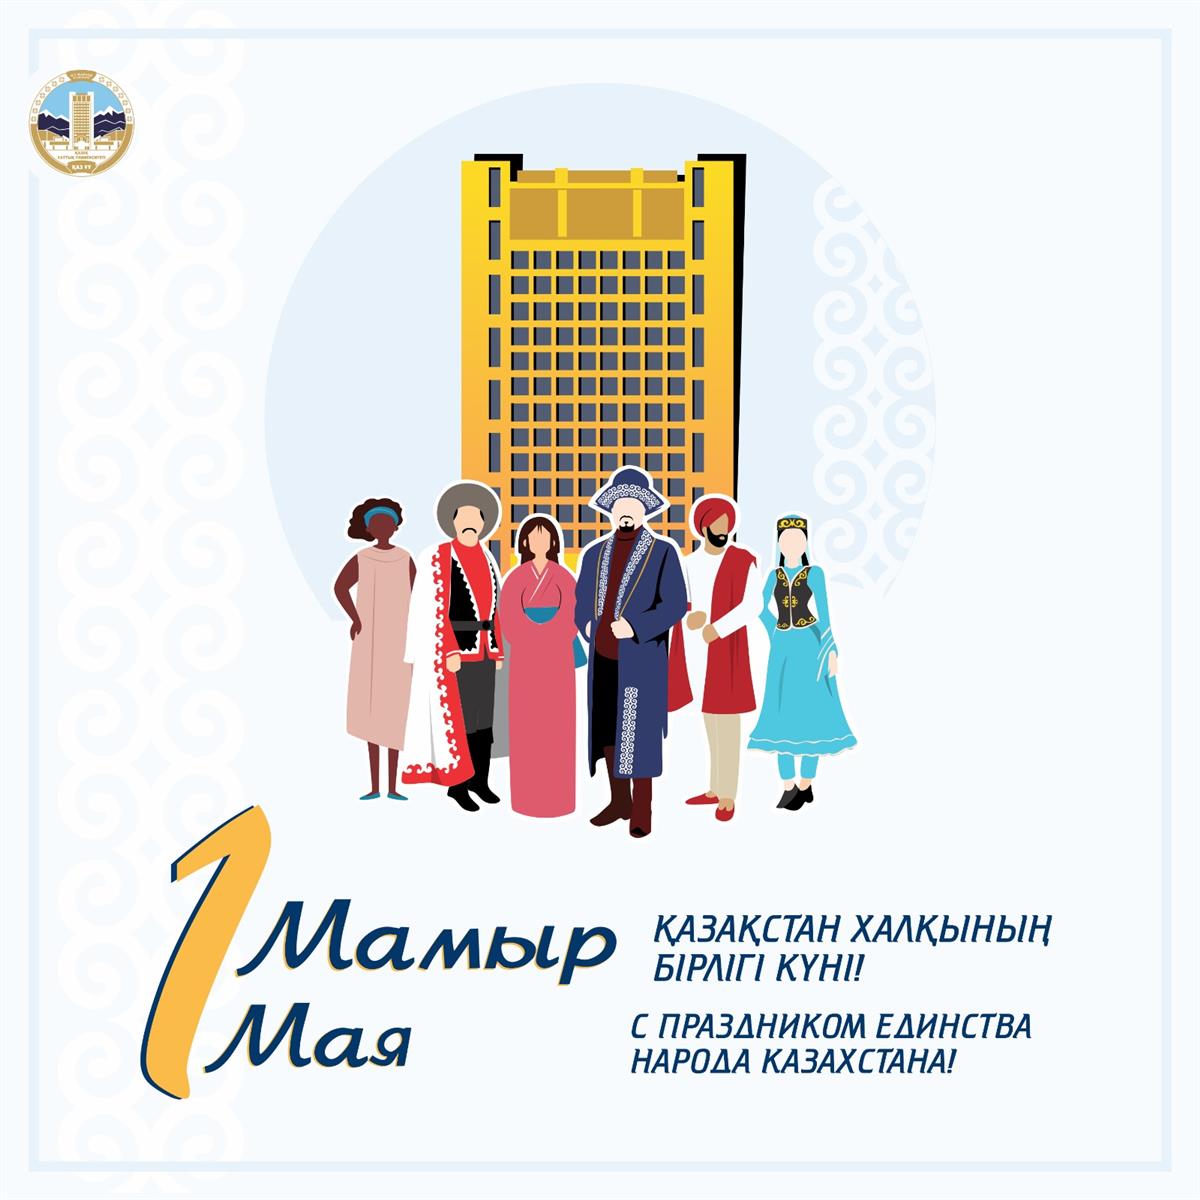 May 1 – The Day of Unity of the People of Kazakhstan